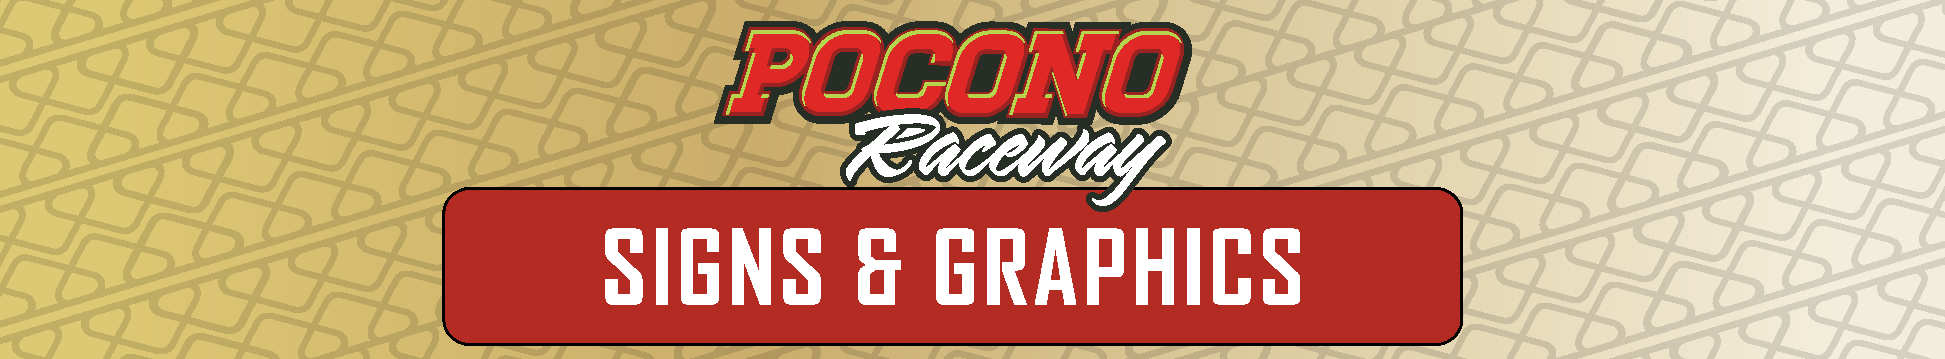 Blog: Learn About Pocono Raceway Signs & Graphics